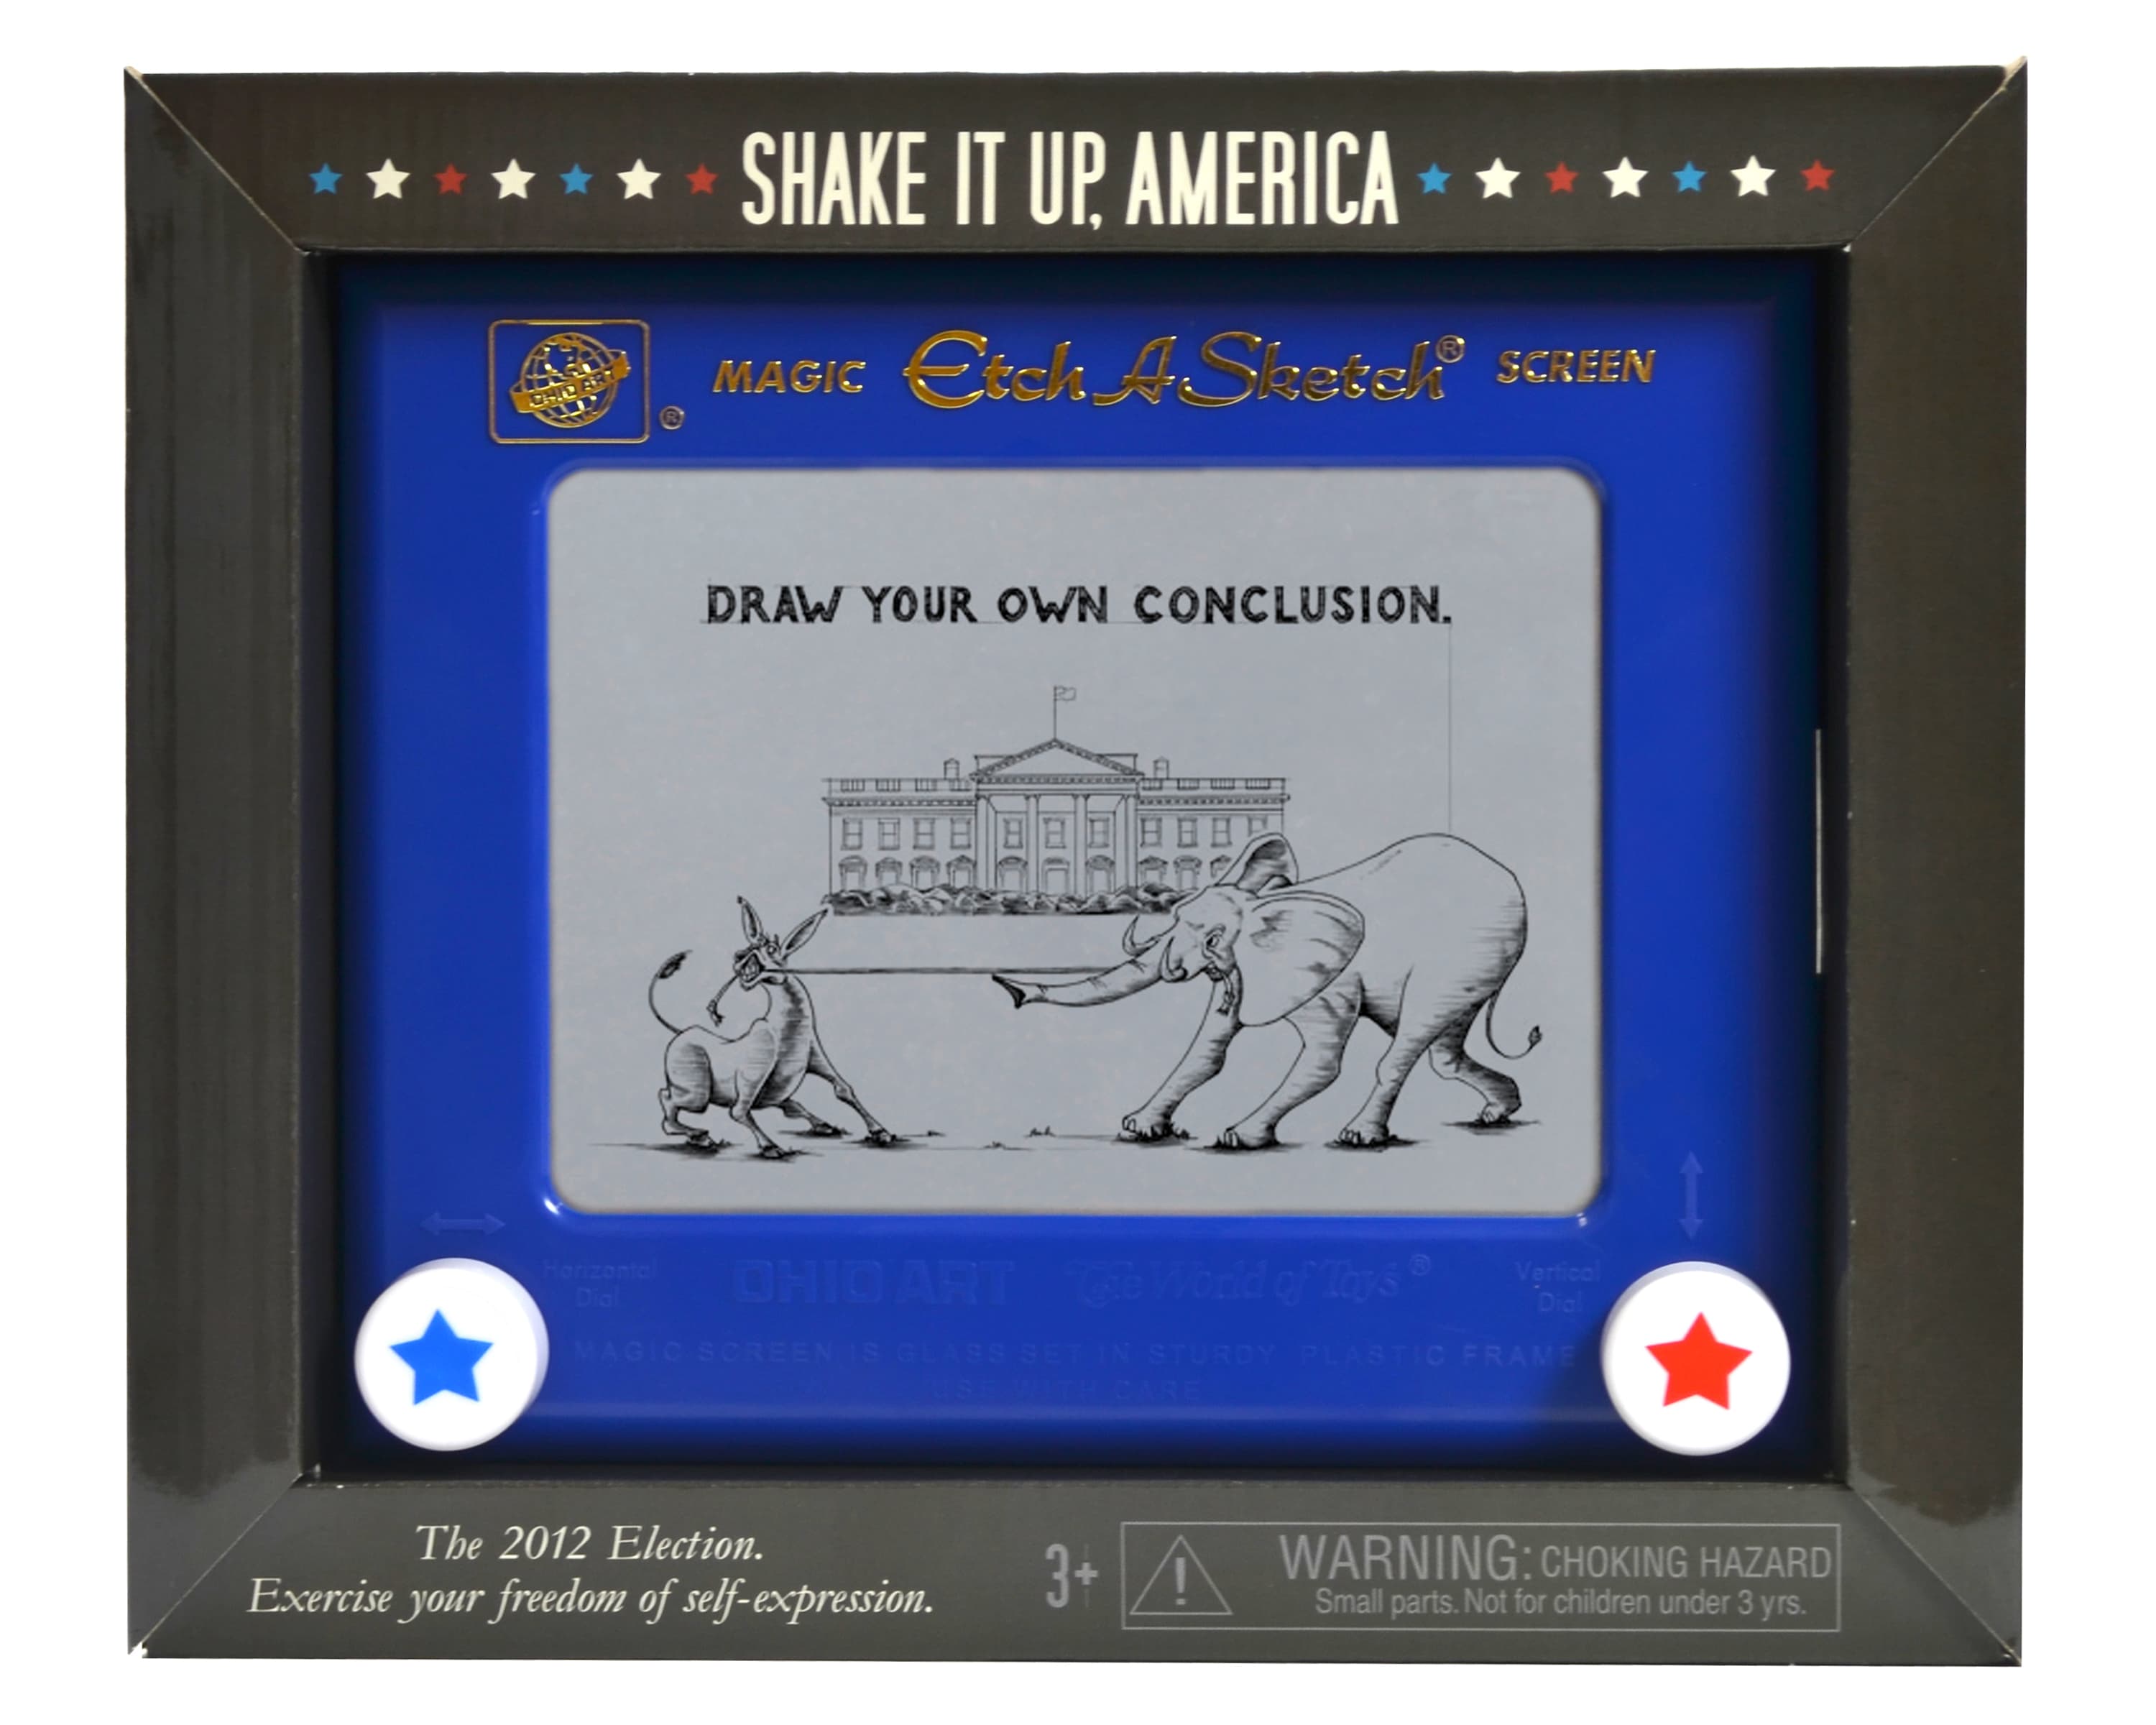 Etch-a-Sketch all the way to Paris! - The American Academy of Art College